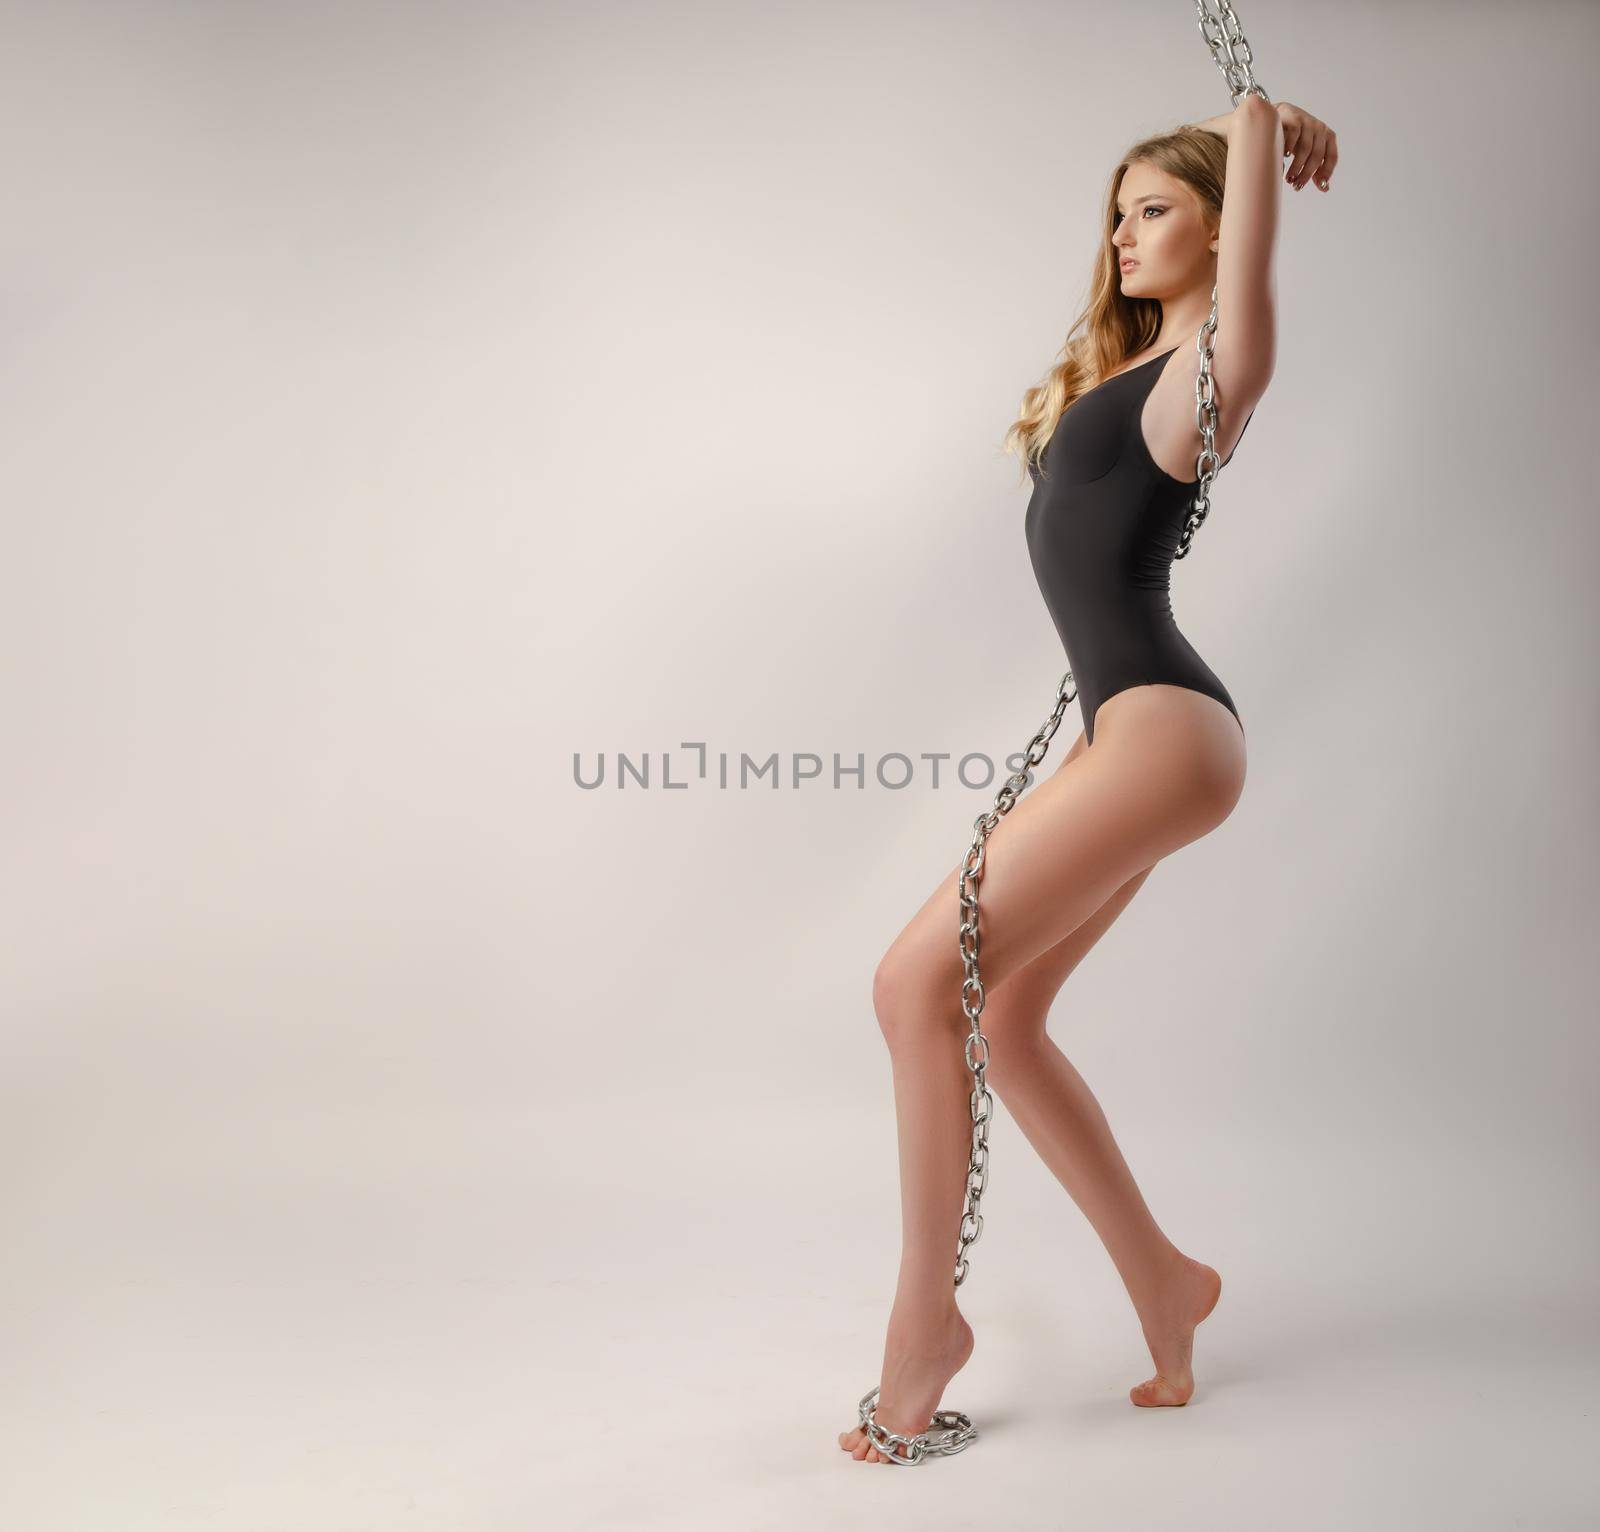 the sexy slender girl in a bodysuit posing with a large chain